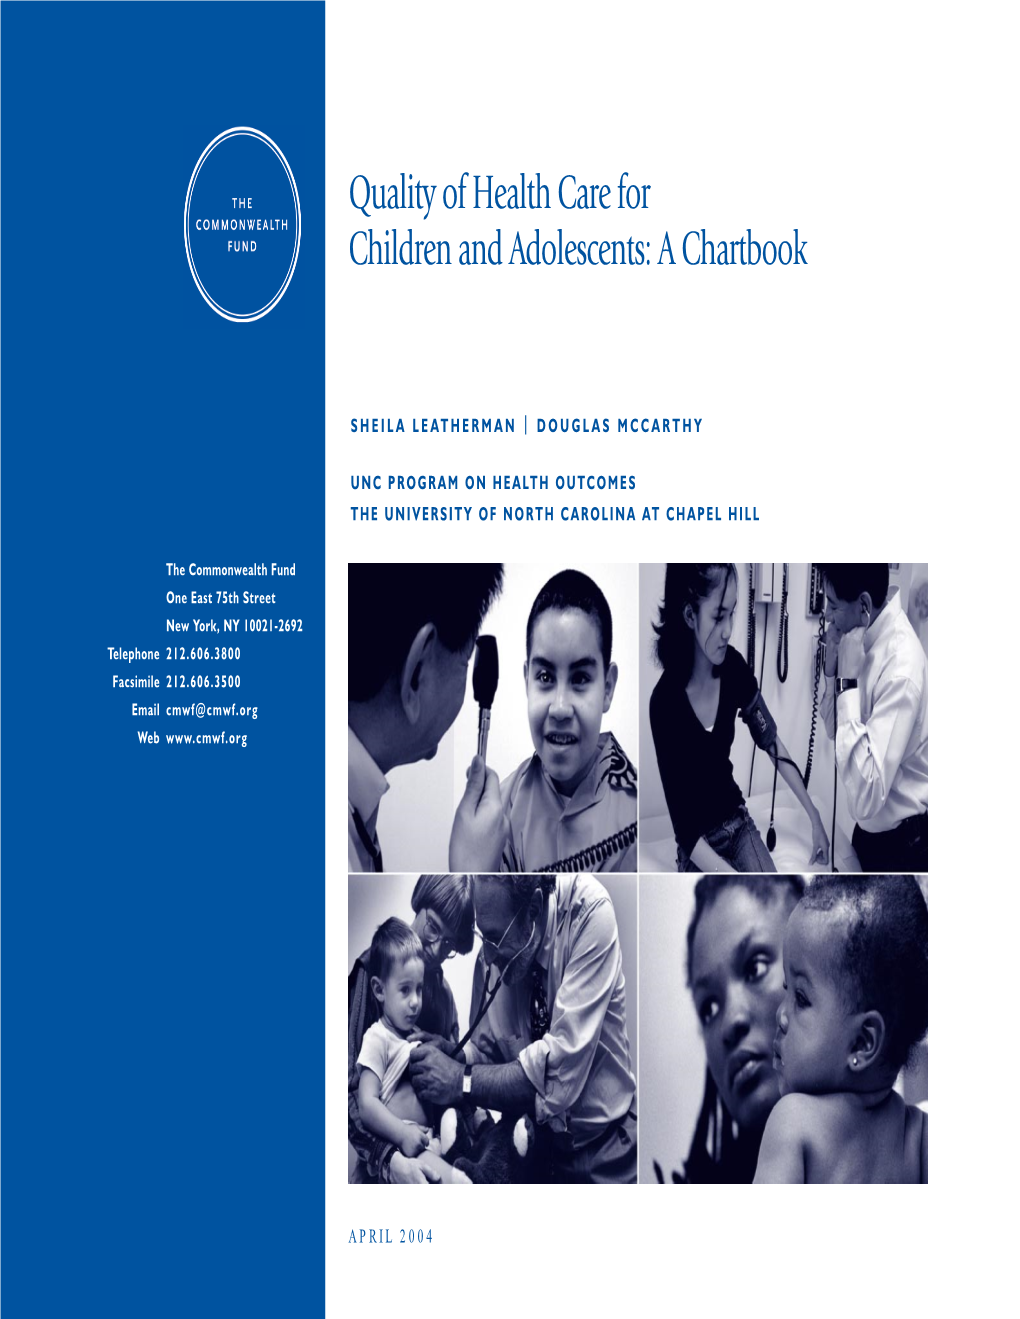 Quality of Health Care for Children and Adolescents: a Chartbook